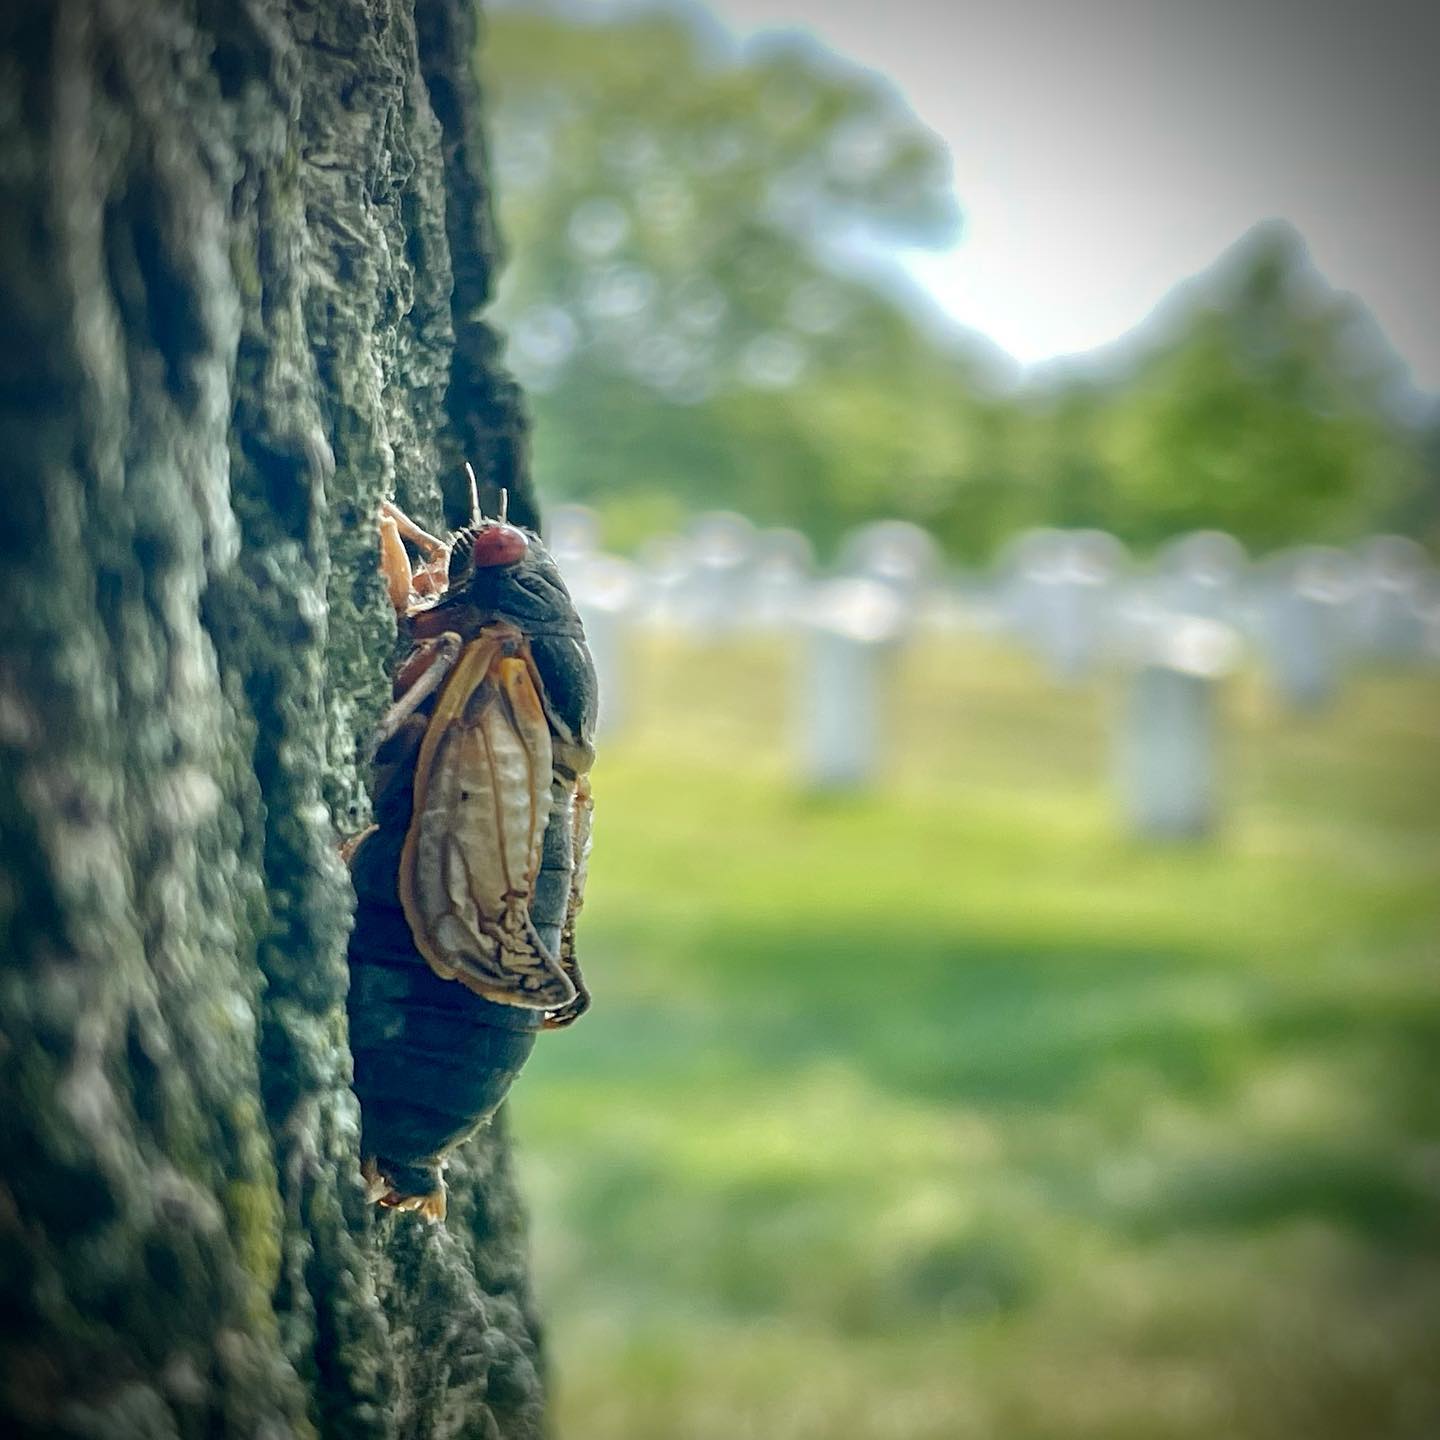 Six services today, four with live web streaming, two with flyovers, and all with millions of cicadas starting to climb up the trees.